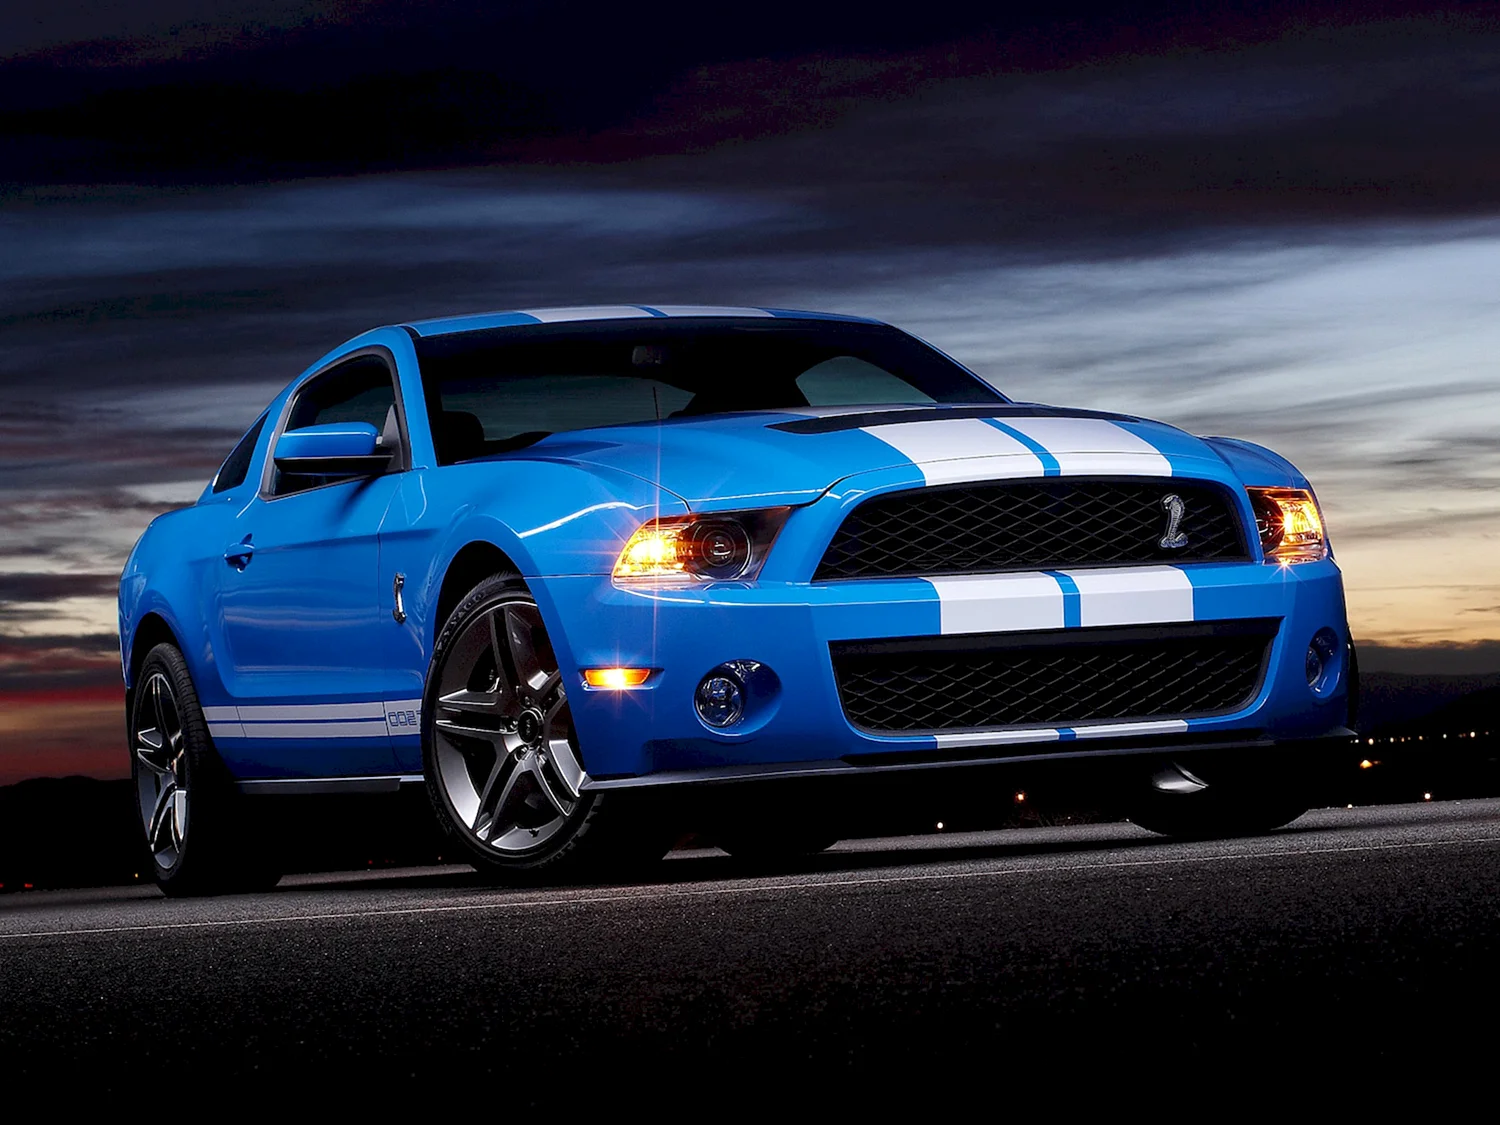 Ford Mustang Shelby gt500 2014